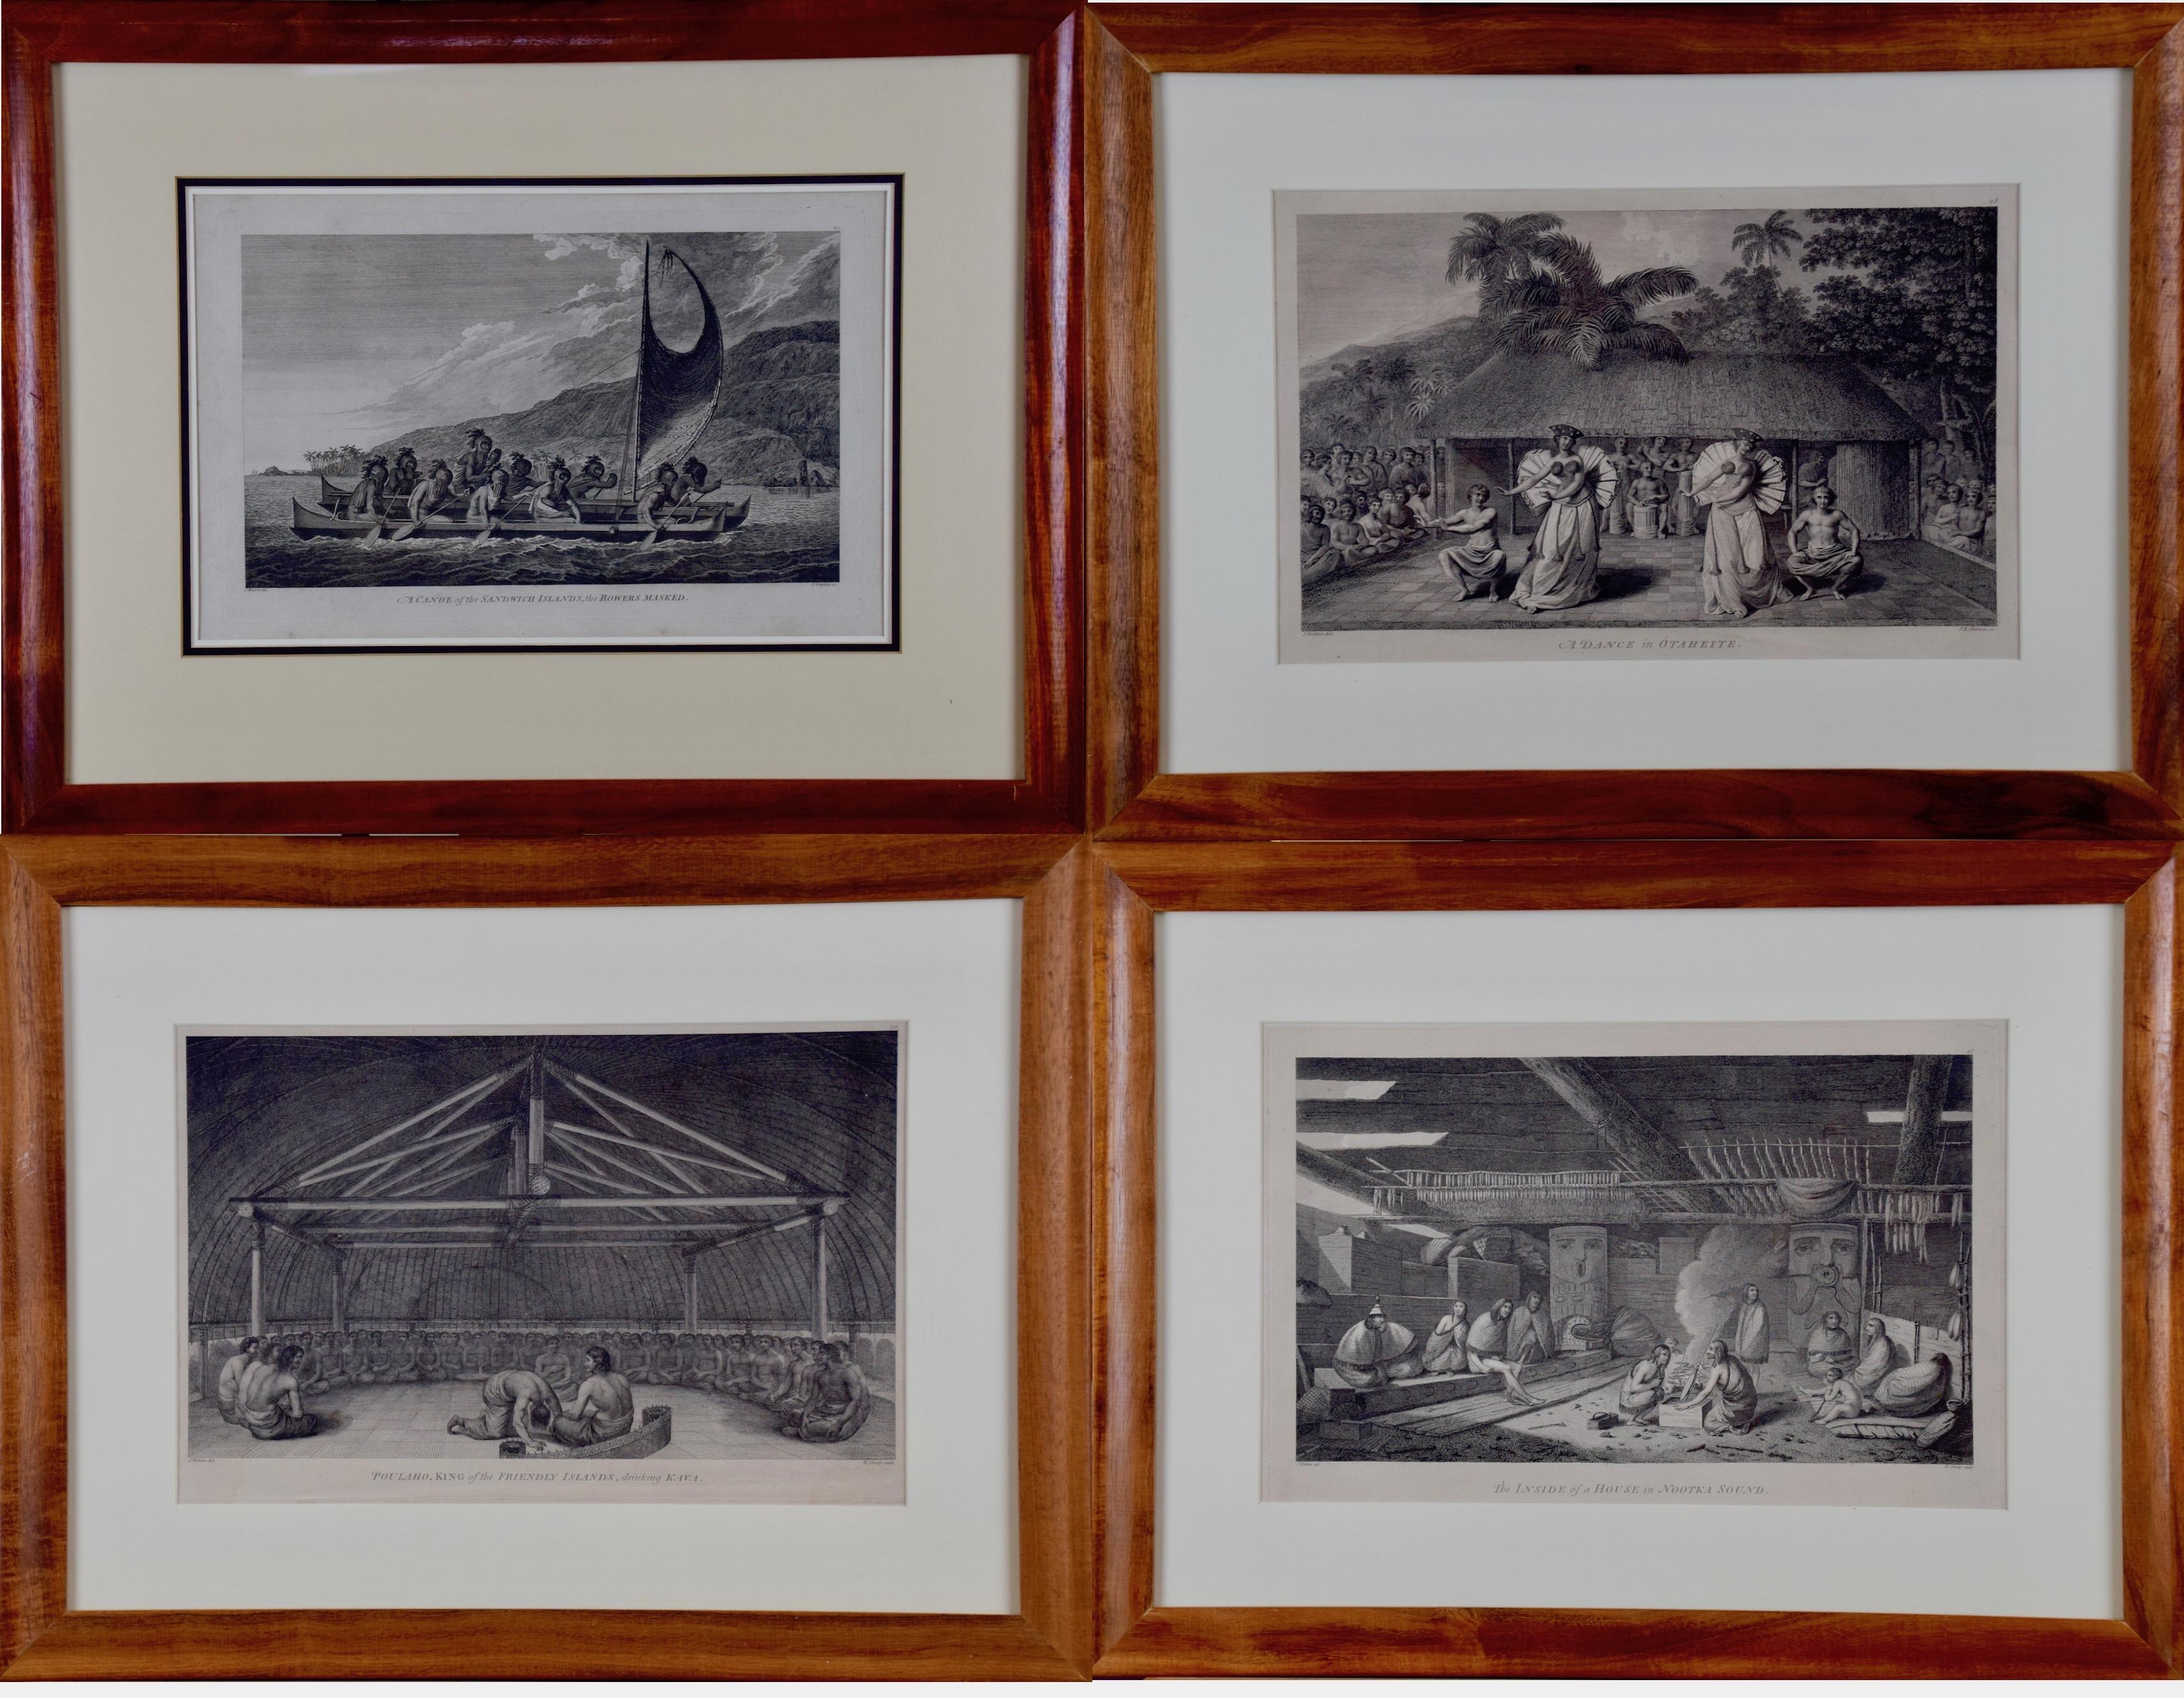 A Group of Four 18th Century Engravings from Captain Cook's 3rd Voyage Journal